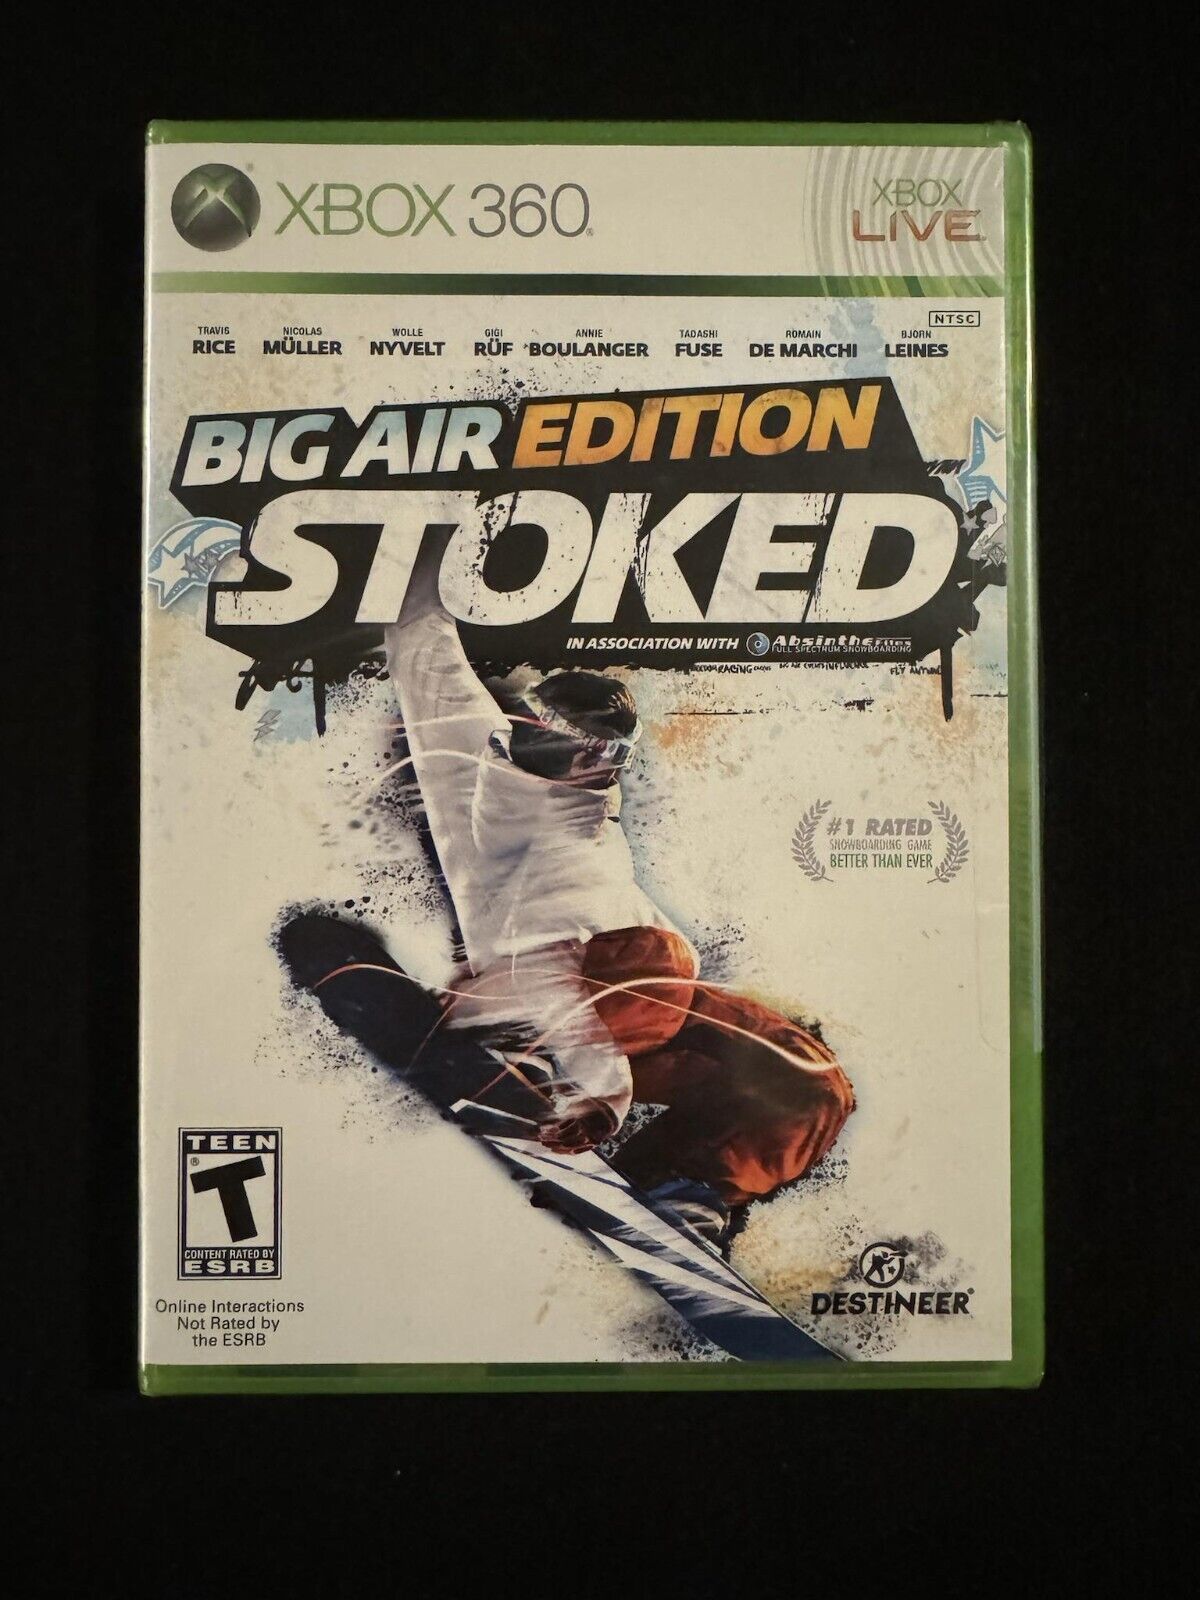 Stoked: Big Air Edition (Microsoft Xbox 360, 2009) - Brand New Sealed